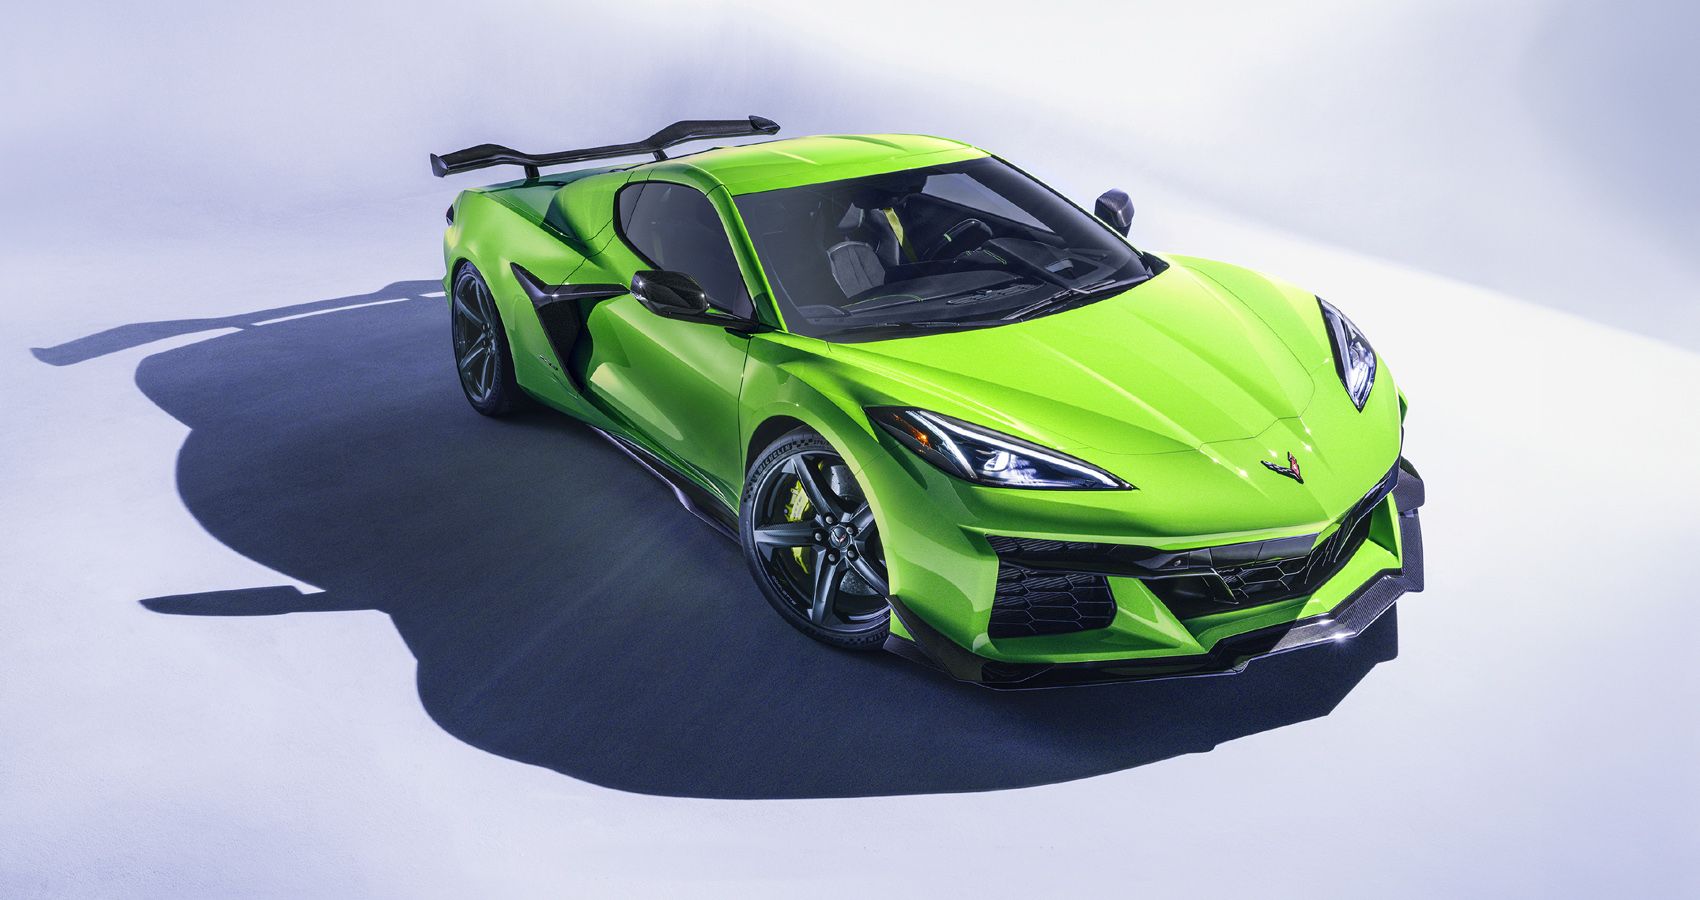 2023 Chevy Corvette Z06 'Own The Color' Minted Green "Own the Color" Car